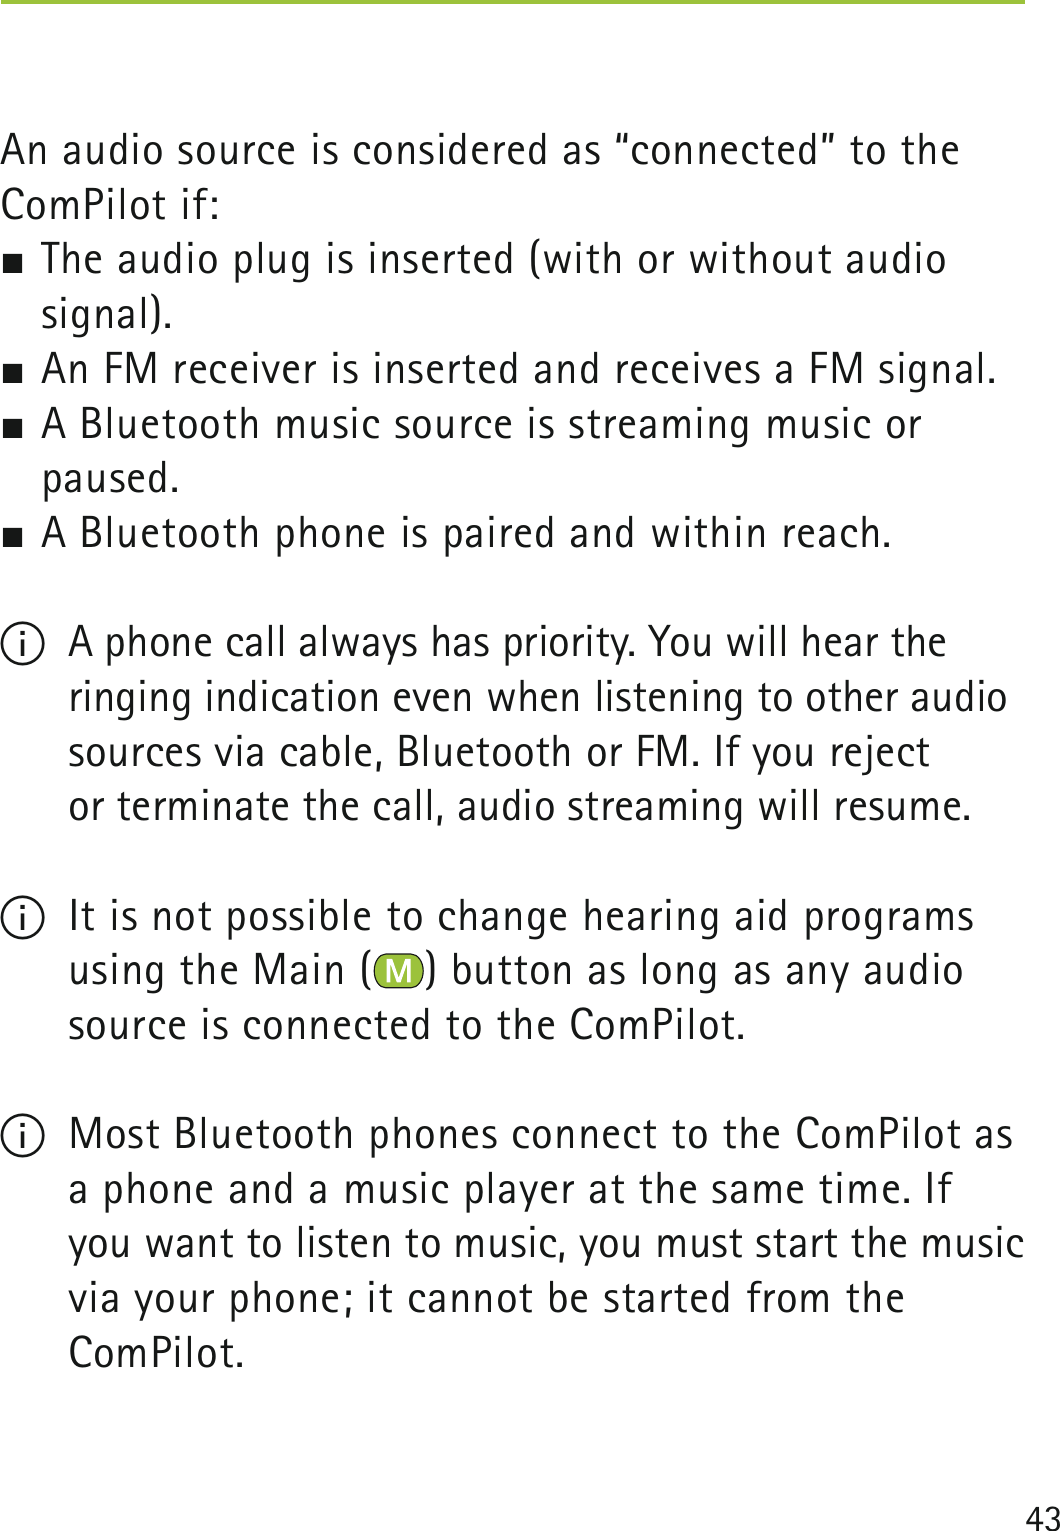 43An audio source is considered as “connected” to the ComPilot if: The audio plug is inserted (with or without audio  signal). An FM receiver is inserted and receives a FM signal. A Bluetooth music source is streaming music or paused. A Bluetooth phone is paired and within reach.I  A phone call always has priority. You will hear the ringing indication even when listening to other audio sources via cable, Bluetooth or FM. If you reject  or terminate the call, audio streaming will resume.I  It is not possible to change hearing aid programs using the Main ( ) button as long as any audio source is connected to the ComPilot.I  Most Bluetooth phones connect to the ComPilot as a phone and a music player at the same time. If you want to listen to music, you must start the music via your phone; it cannot be started from the  ComPilot.  